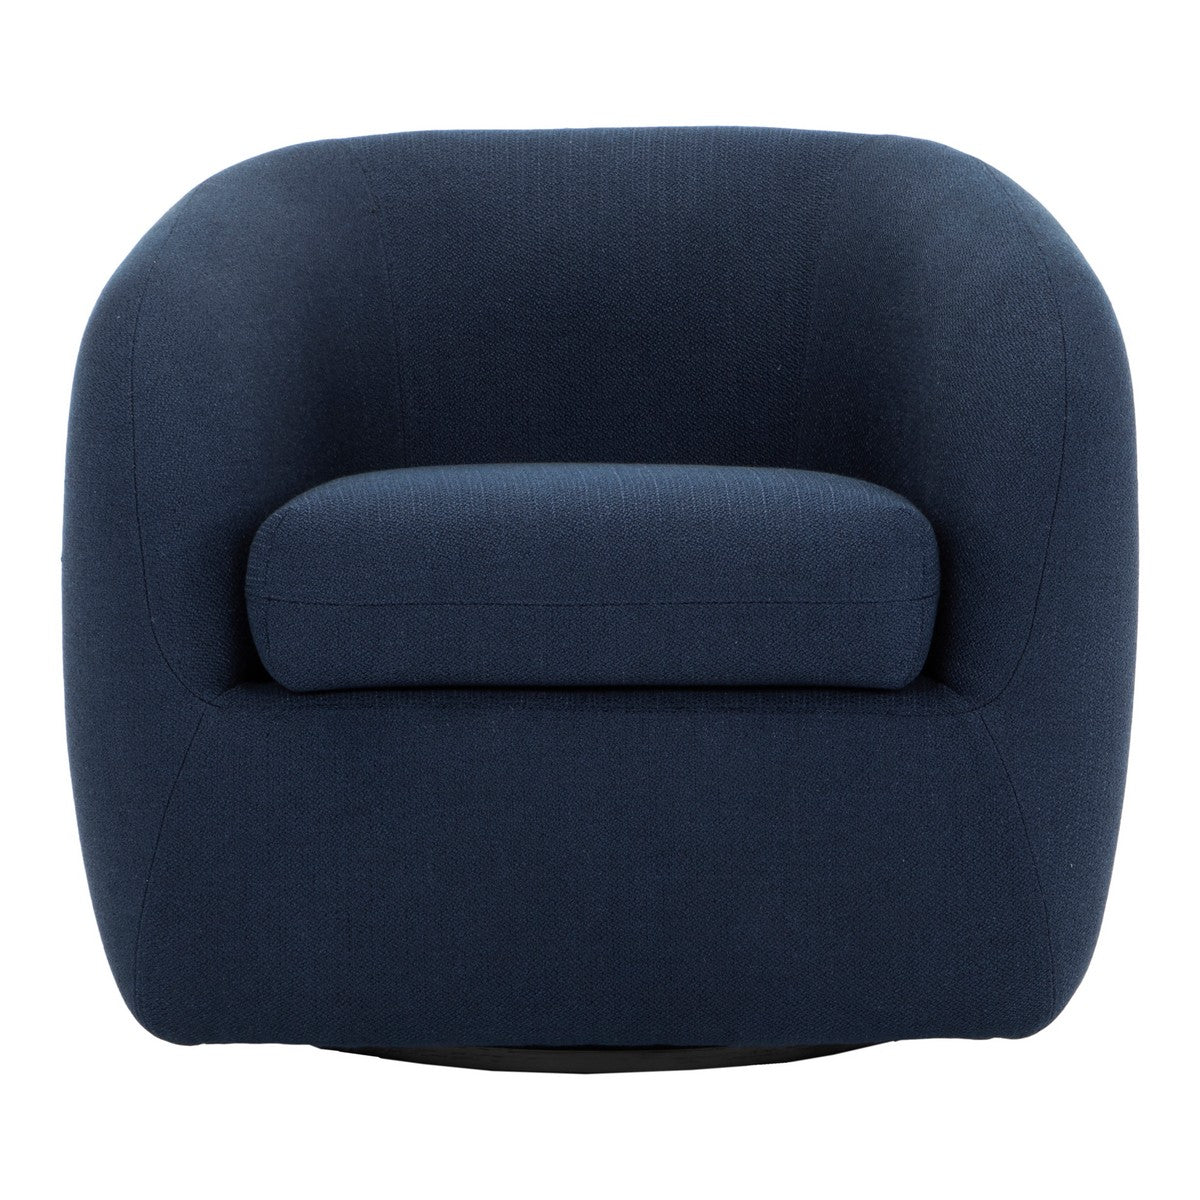 Moe's Home Collection Maurice Swivel Chair Midnight Blue - JM-1003-46 - Moe's Home Collection - lounge chairs - Minimal And Modern - 1